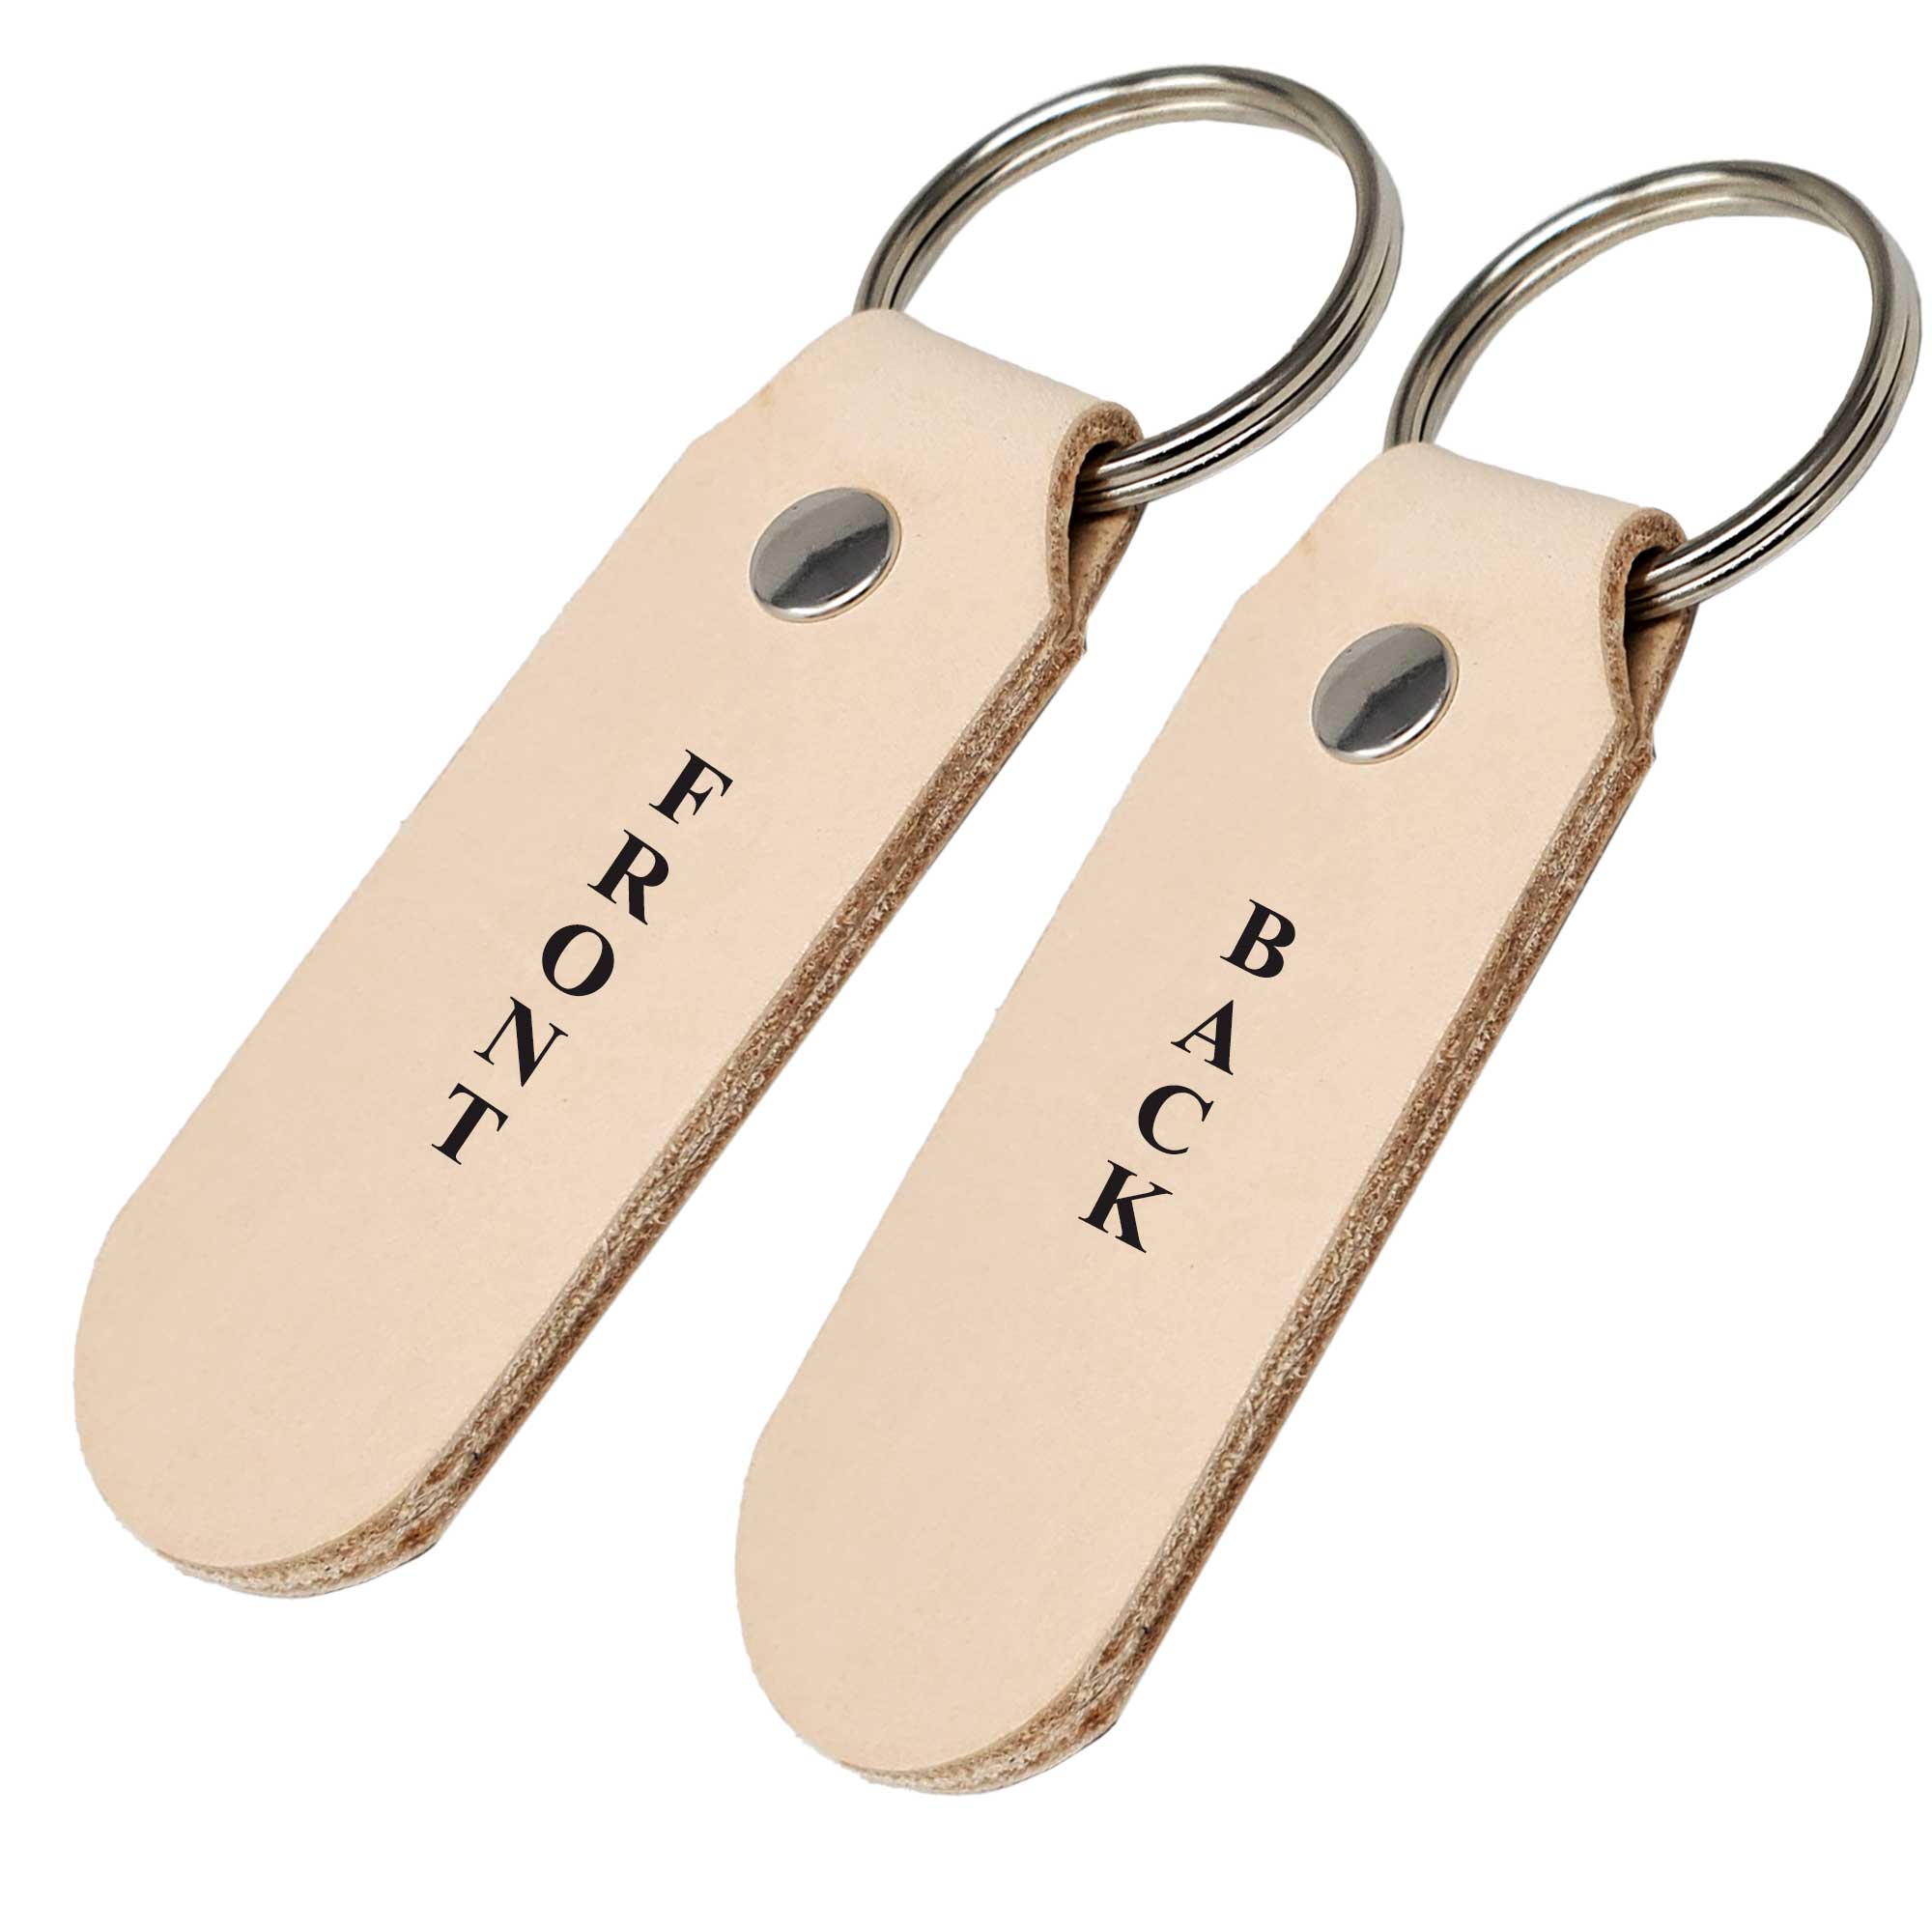 10 pack Blank Leather Keychains ready to be Personalized